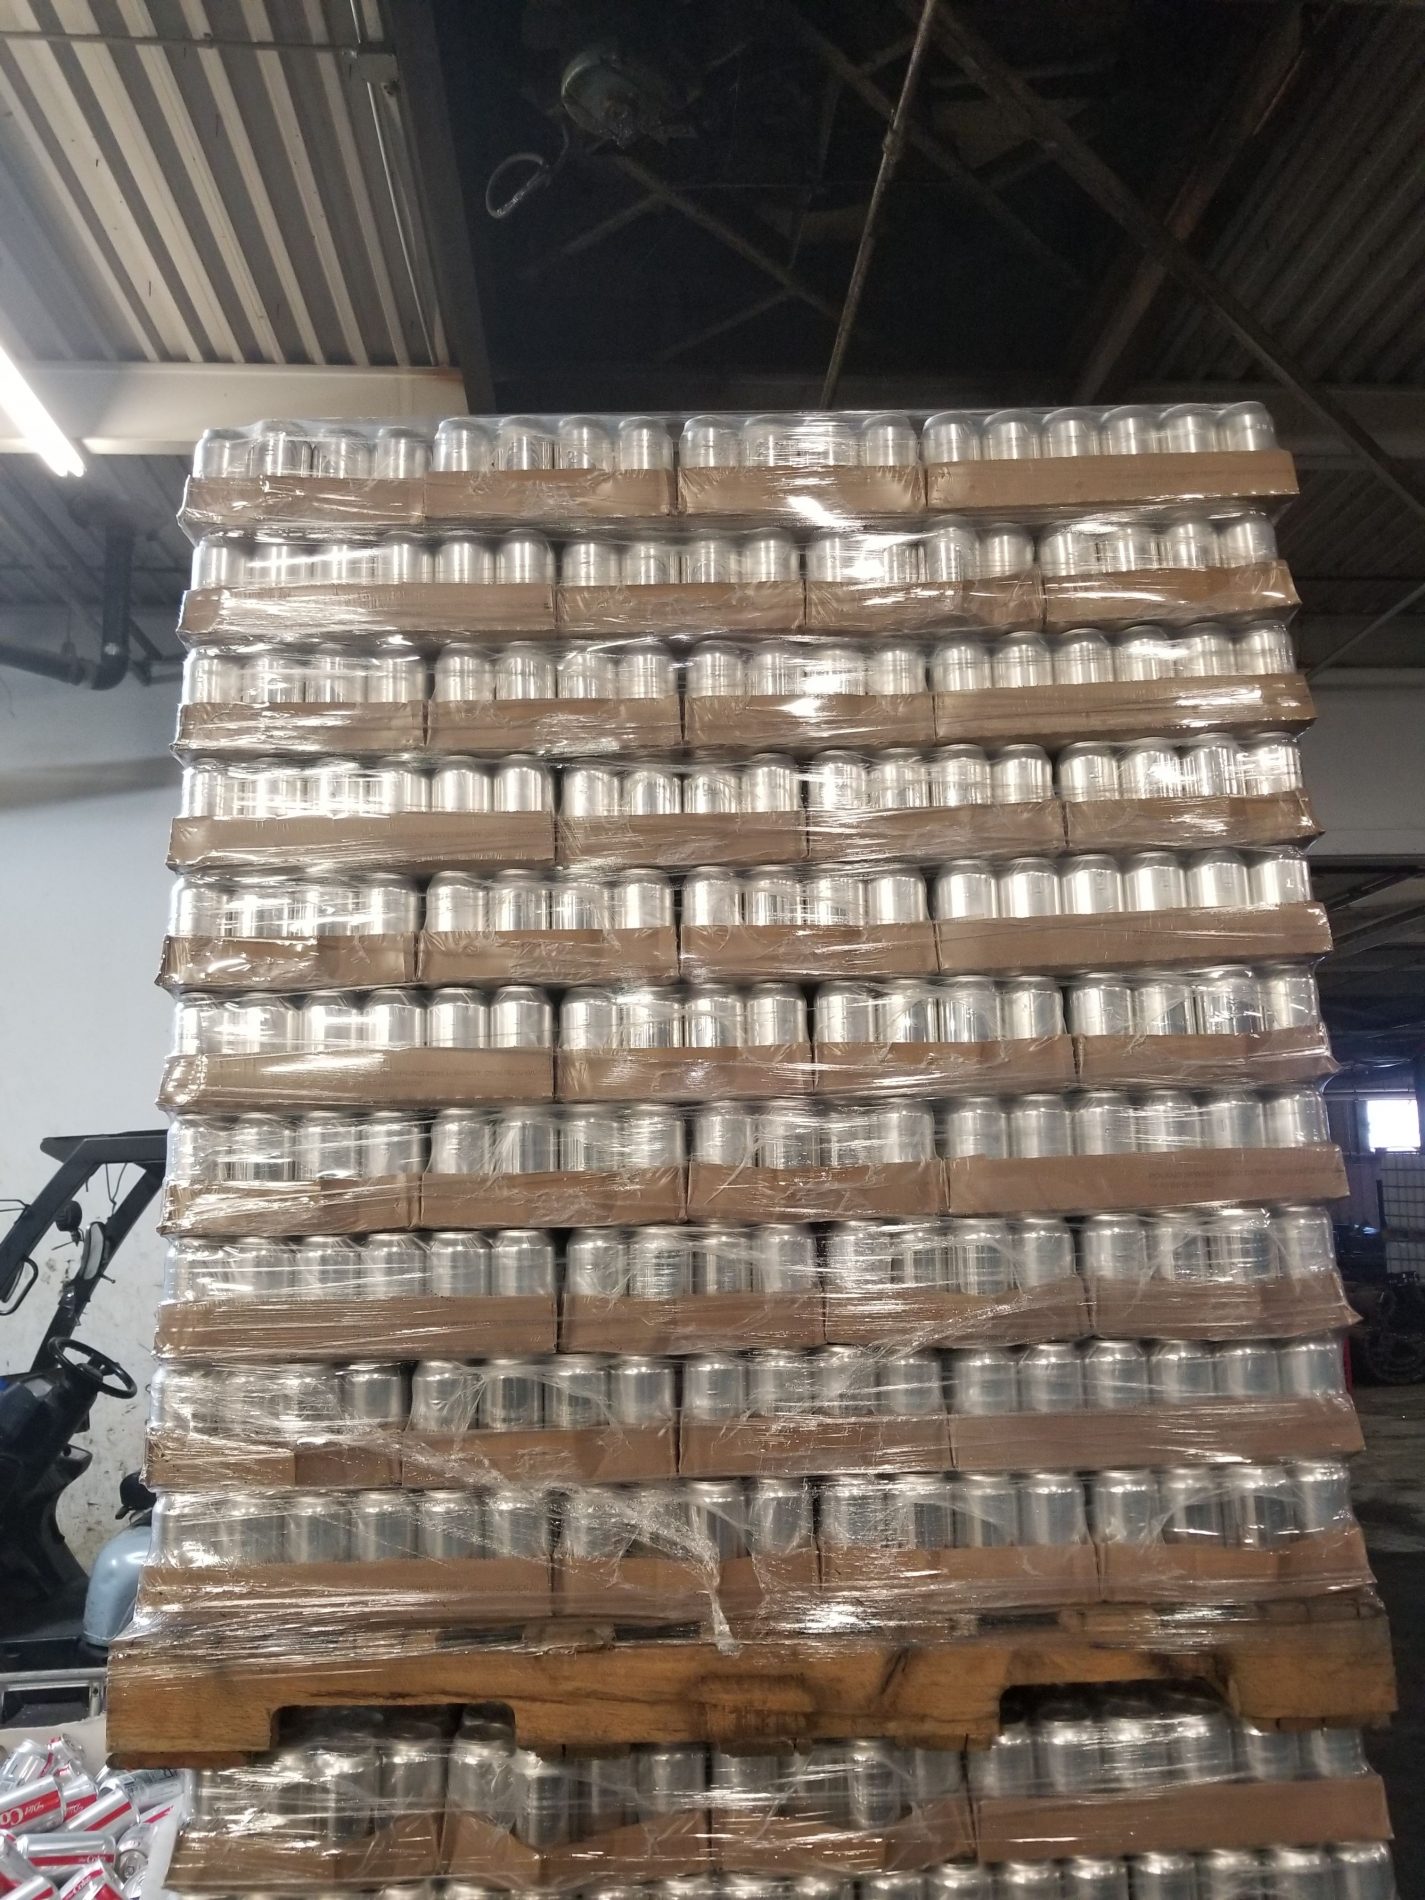 aluminum cans stacked on pallets